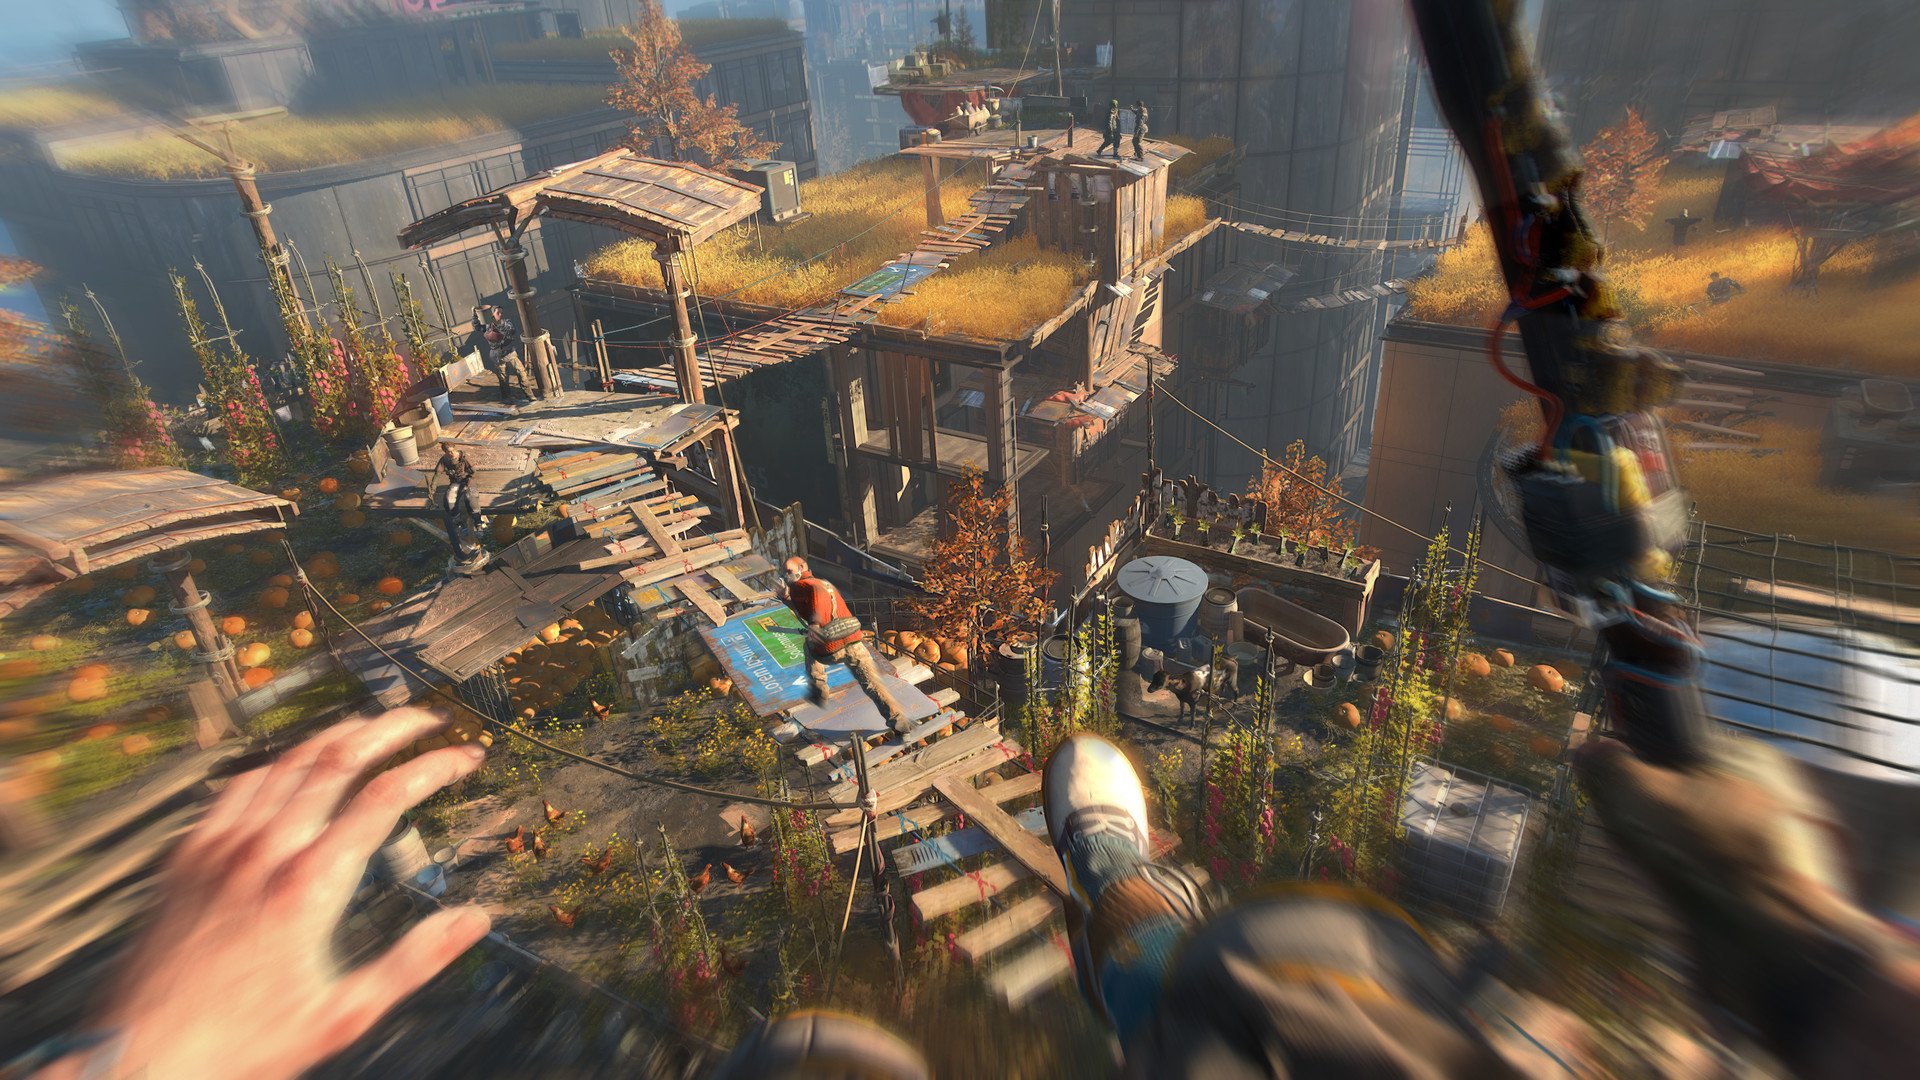 Dying Light 2 Update Fixes Problems With PS4 and PS5 Versions of the Game